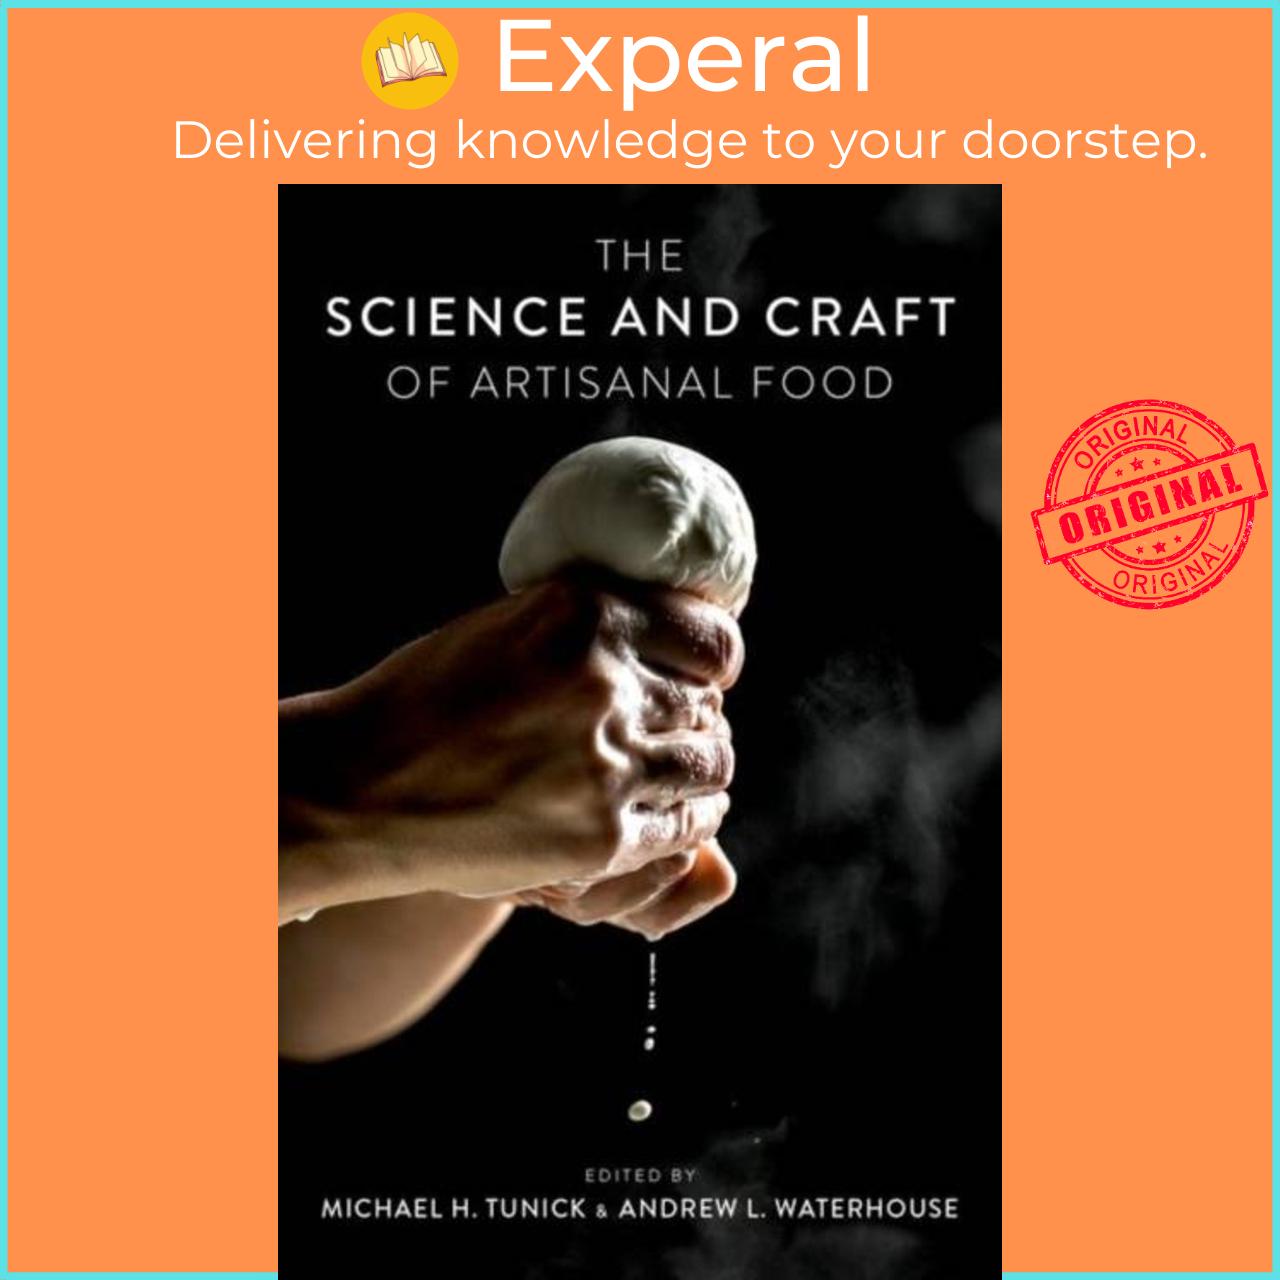 Sách - The Science and Craft of Artisanal Food by Michael H. Tunick (UK edition, hardcover)